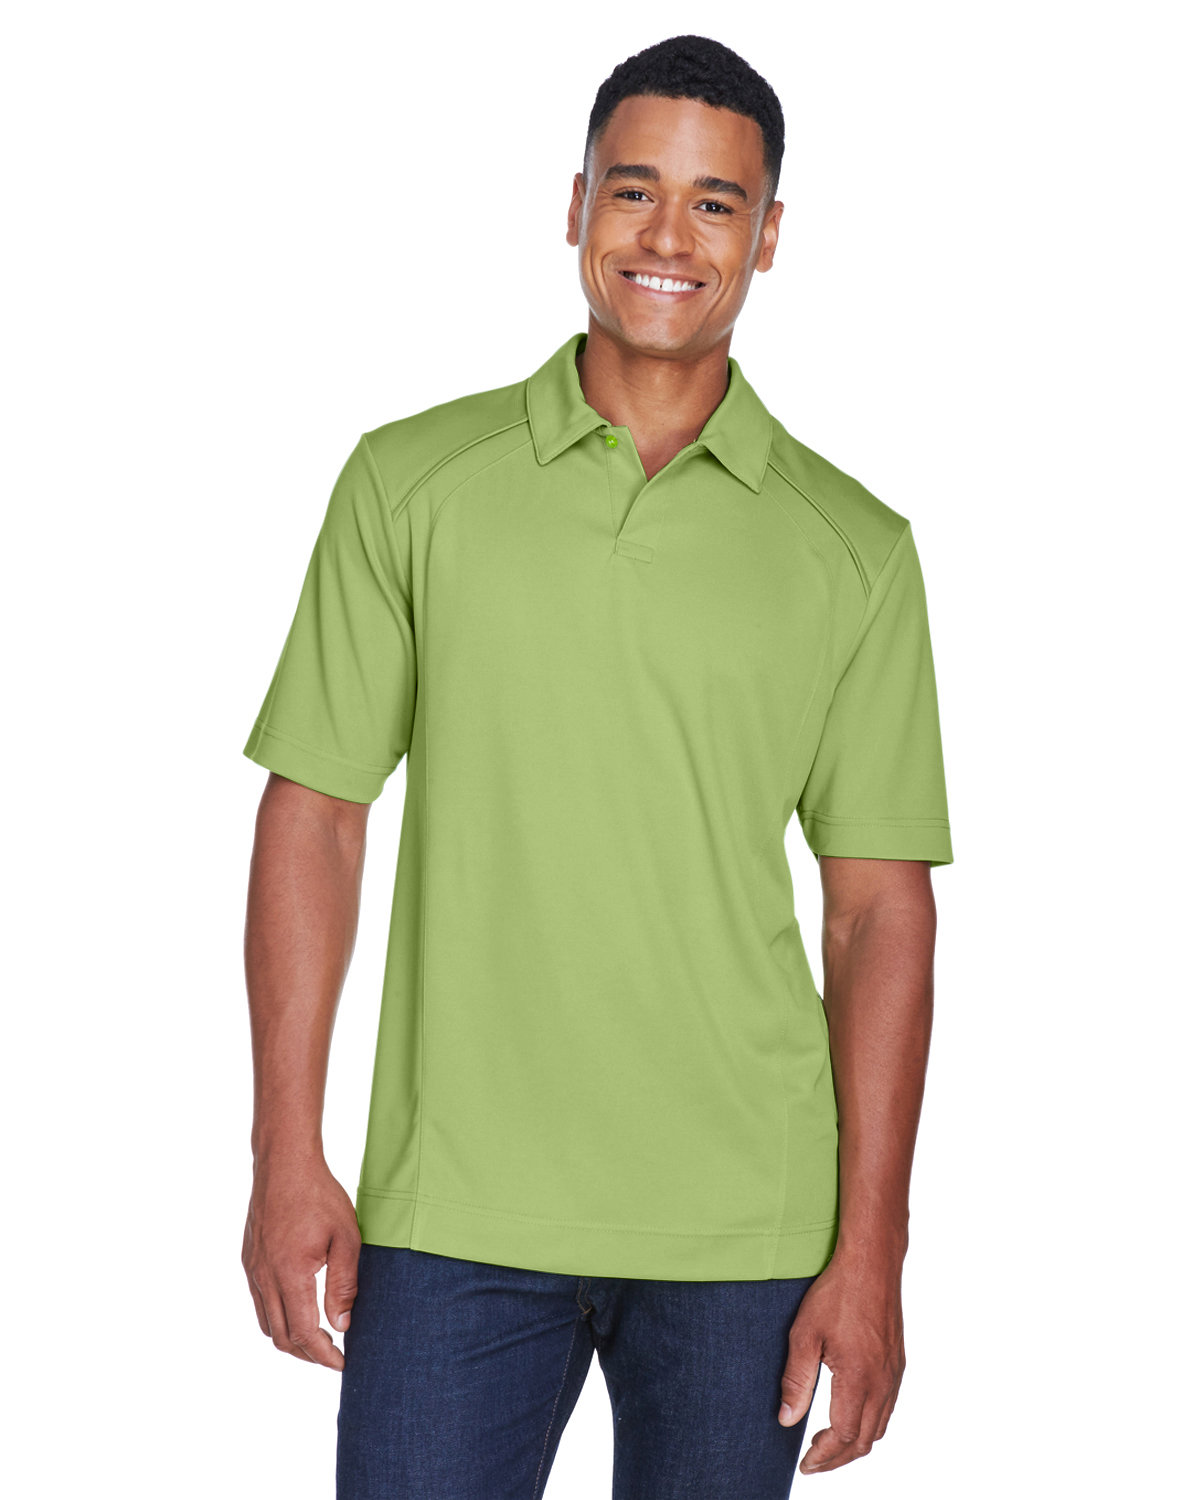 Mens Recycled Polyester Performance Pique Polo-North End